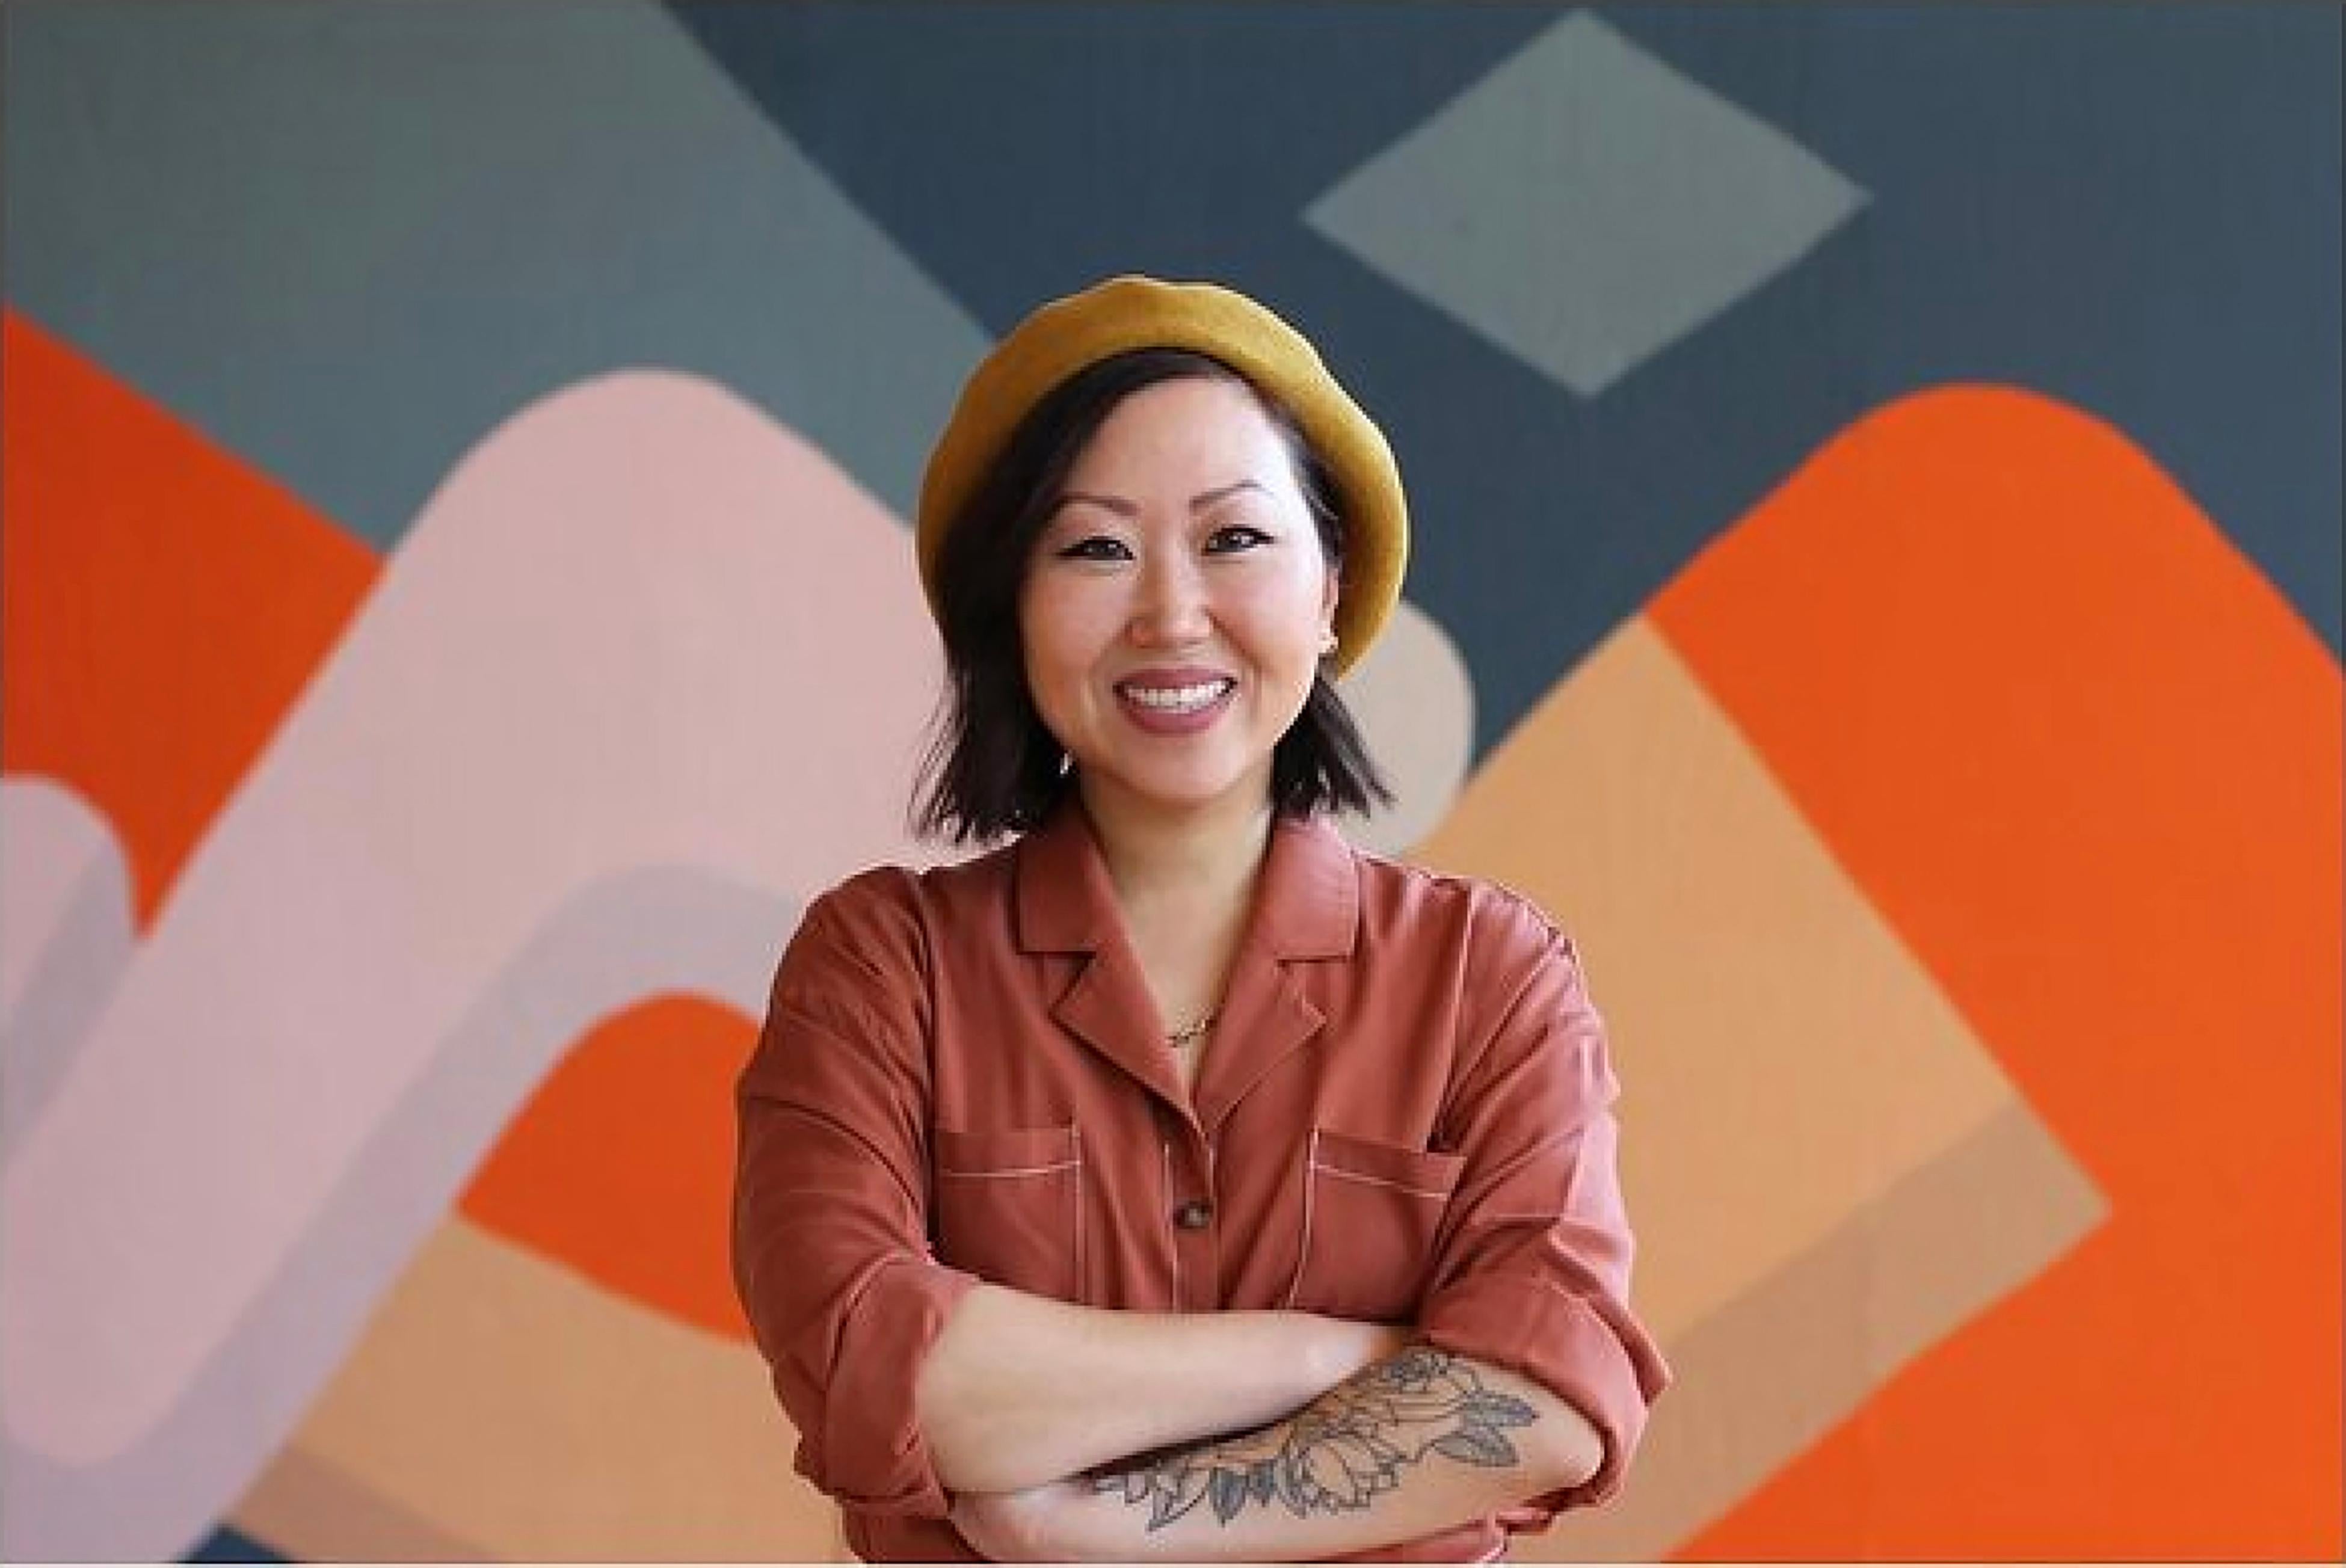 Mary Lai is a multifaceted Korean-American artist based in Los Angeles, California.  Her outlook is that “Art is a universal language that can speak to anyone” and her dreamer mindset is reflected in her vibrant contemporary artwork that aims to